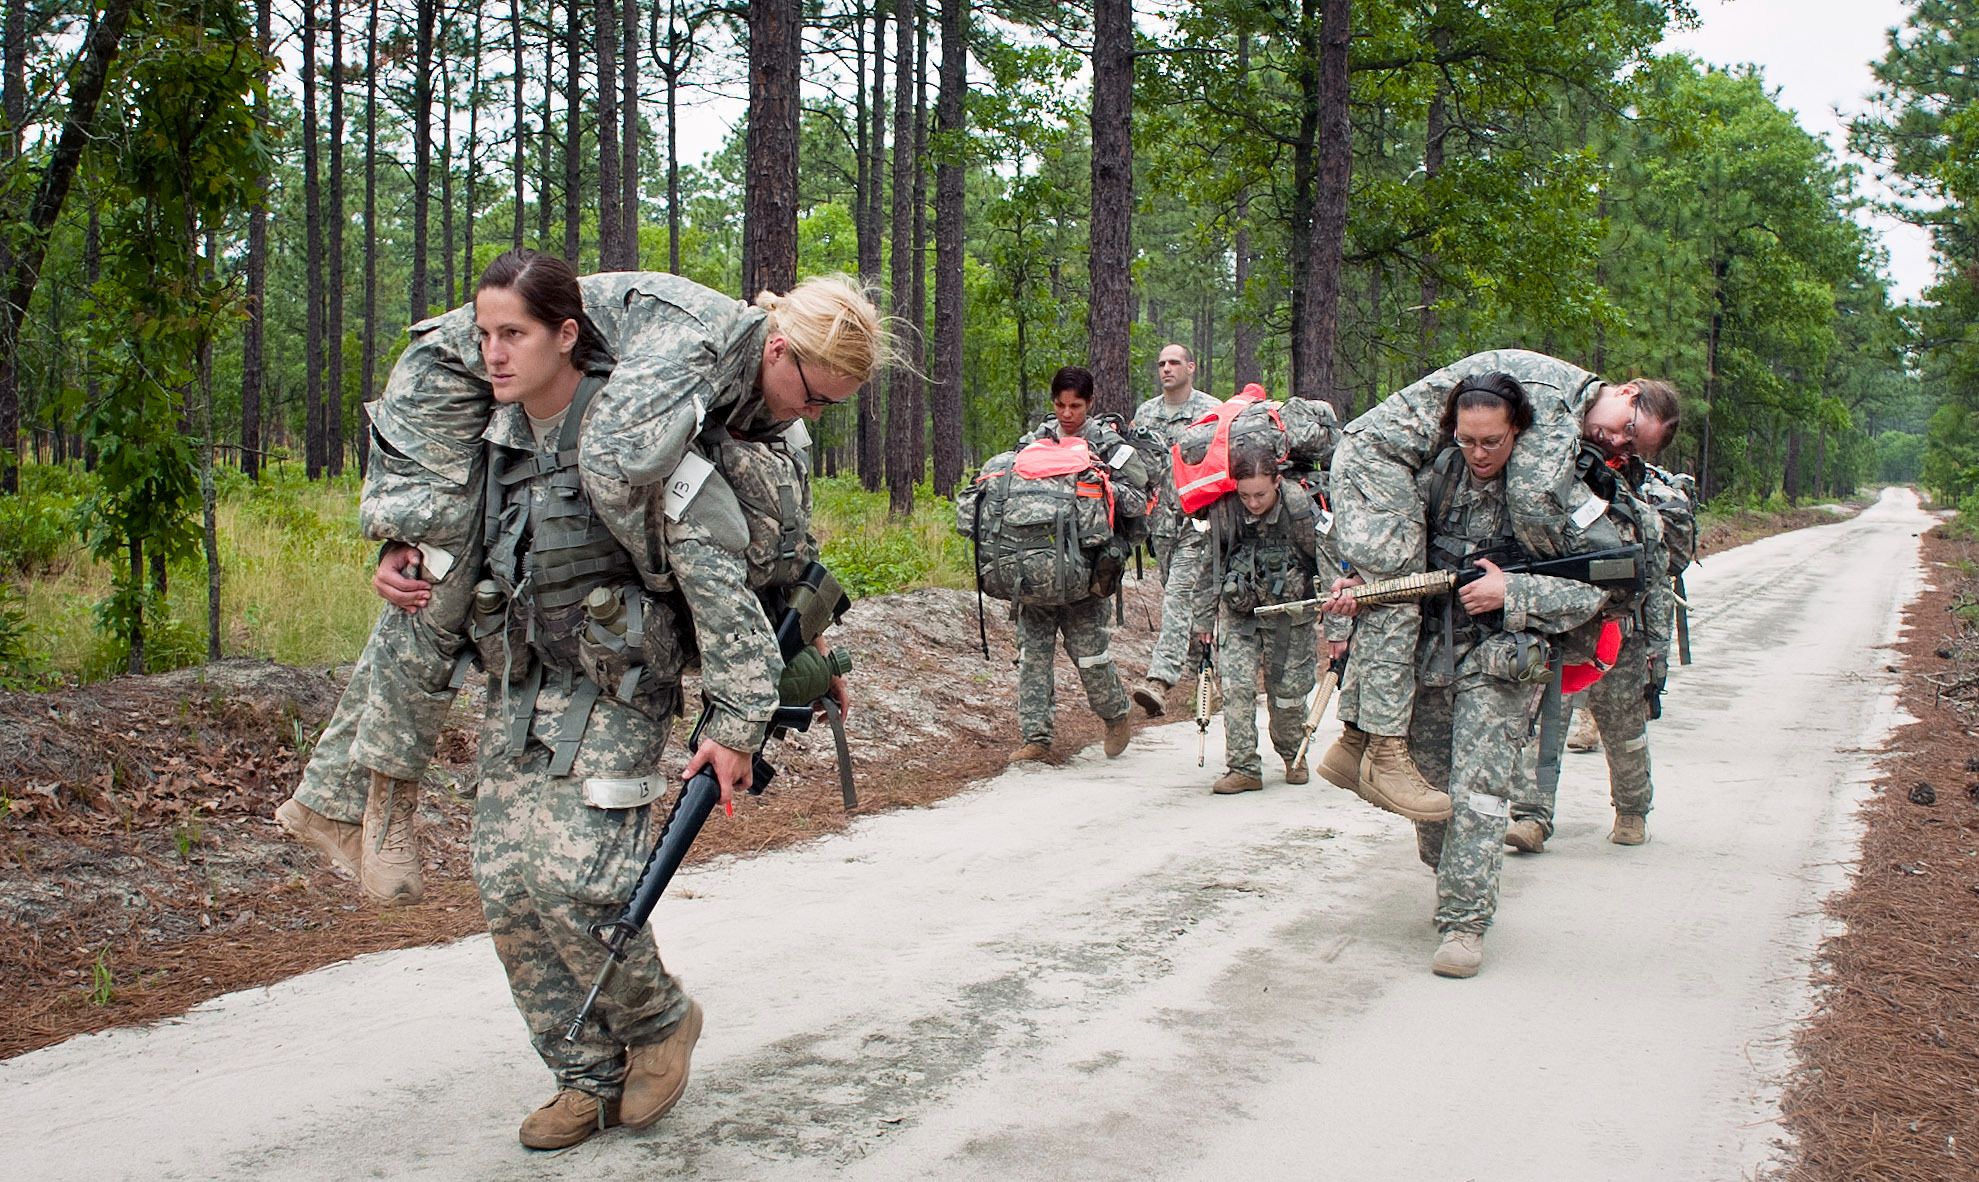 U.S. Army soldiers conduct simulated medical training during the Cultural Support Assessment and Selection program. The U.S. Army Special Operations Command's cultural support program prepares all-female Soldier teams to serve as enablers supporting Army special operations- combat forces in and around secured objective areas.